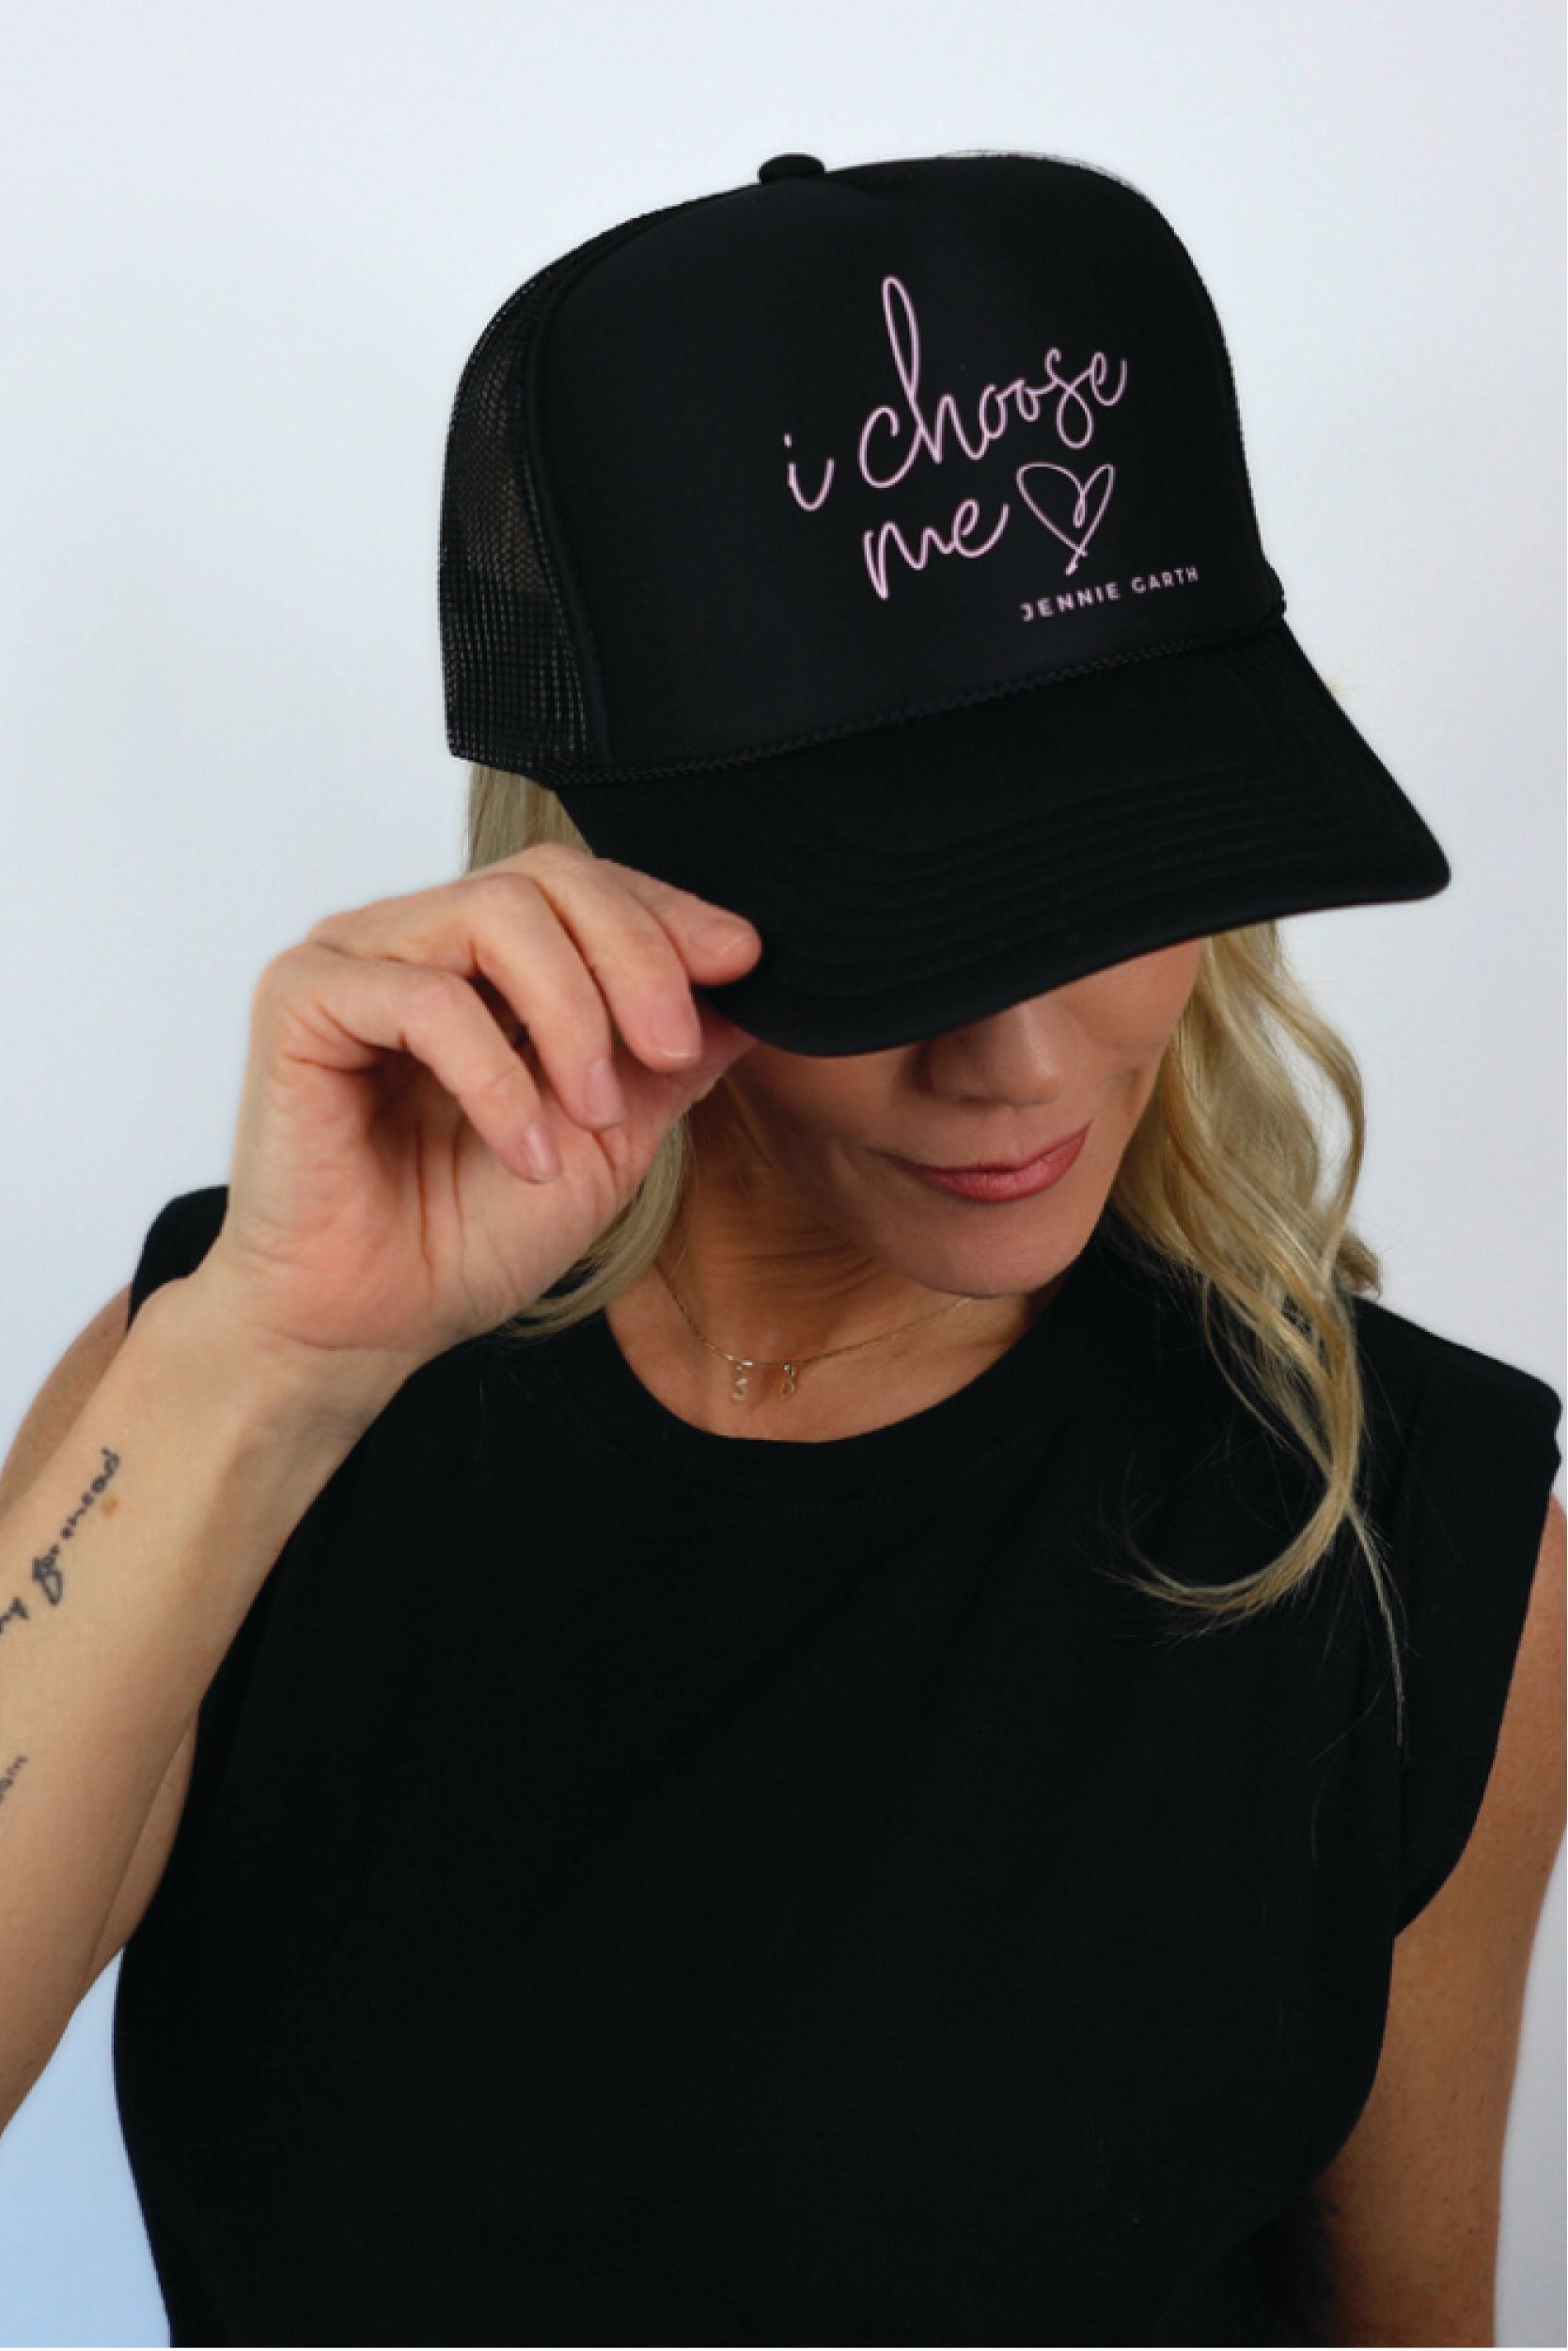 Signature I Choose Me Trucker Hat Black with Pink